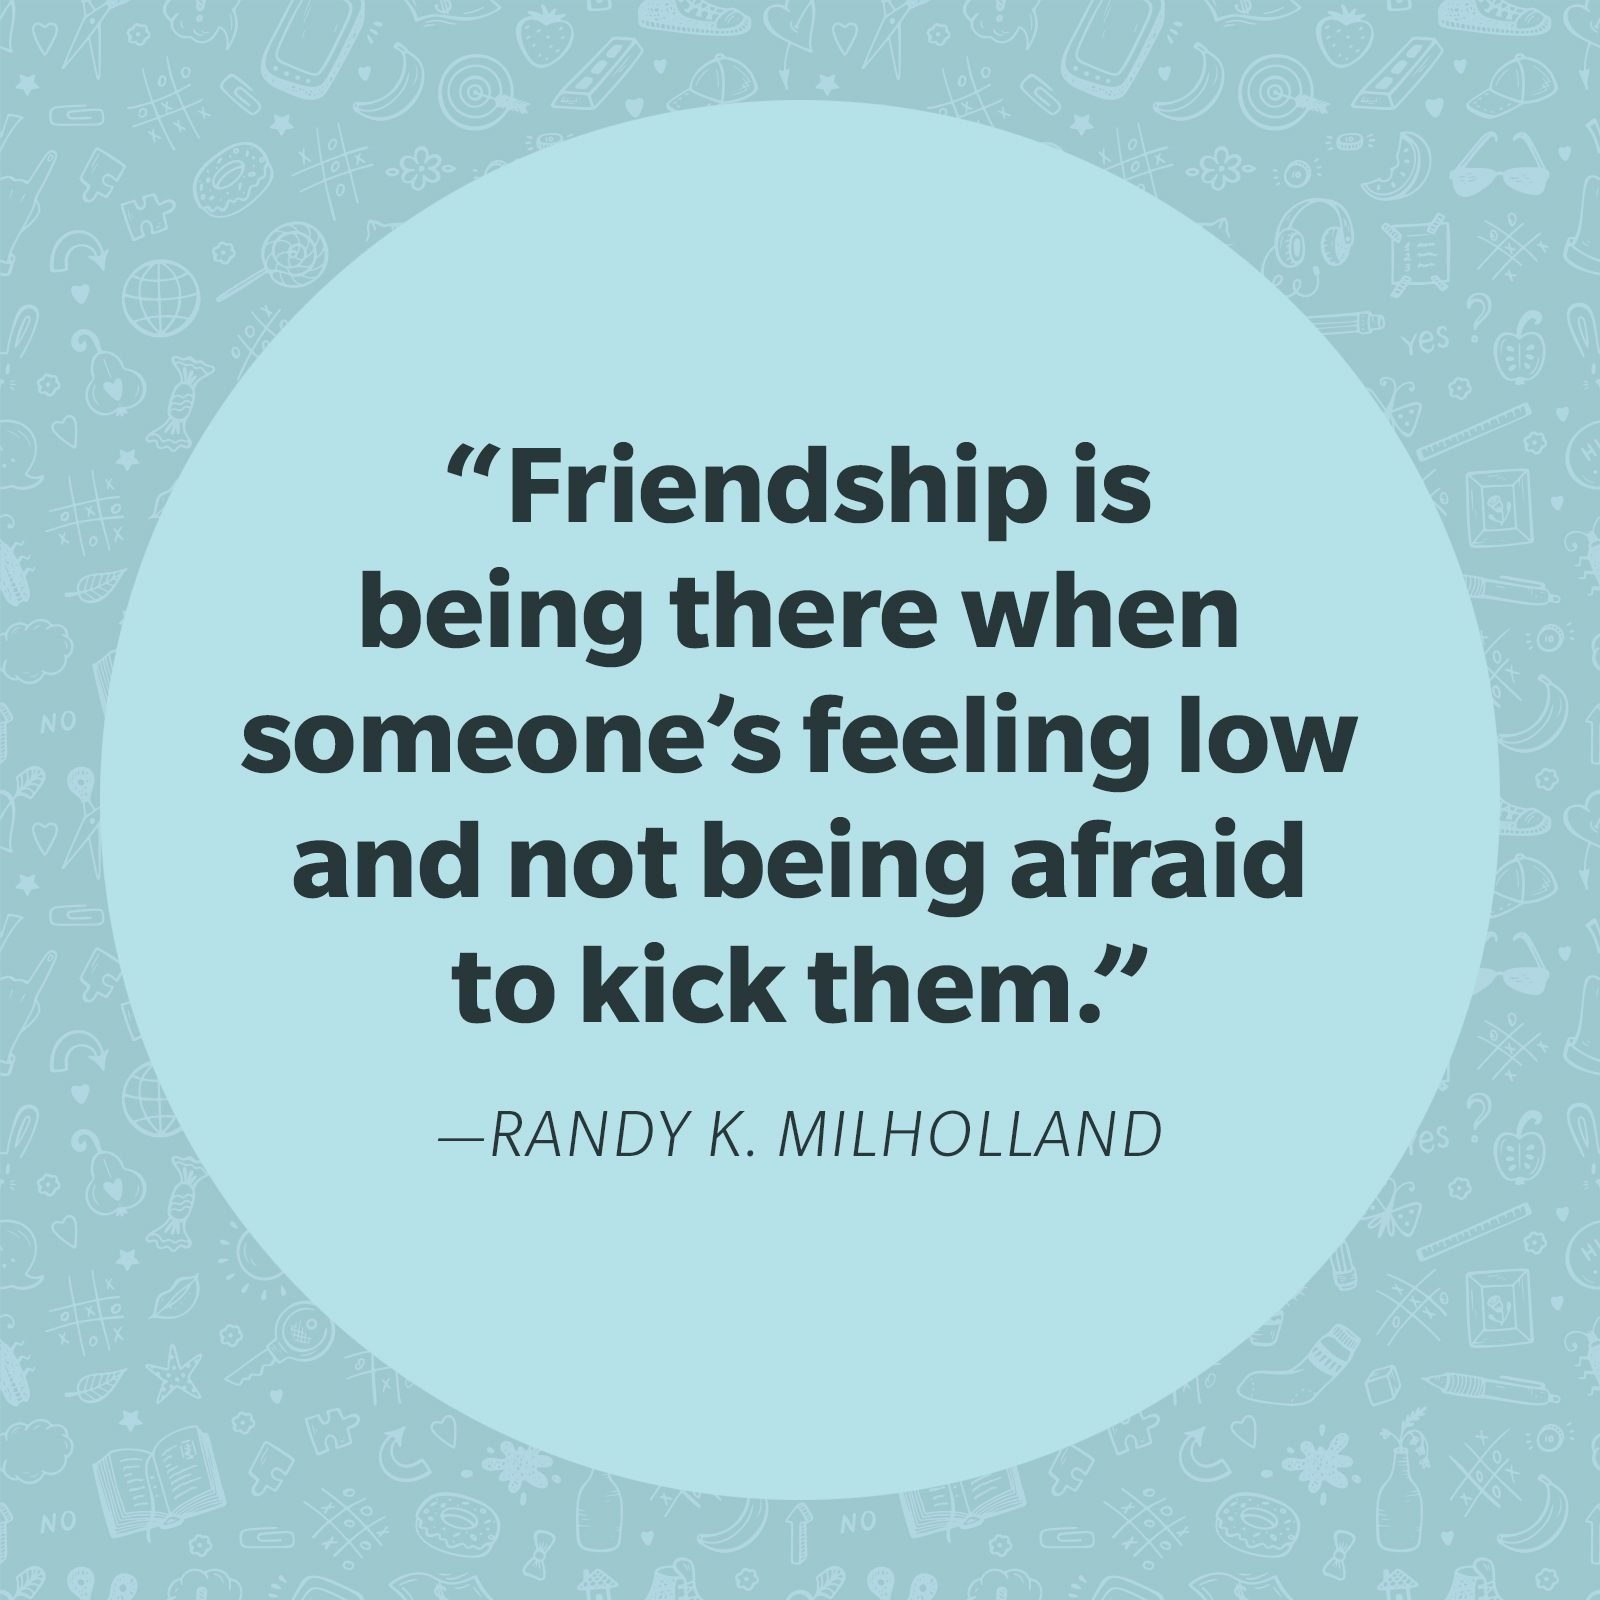 What Are The Best Friendship Quotes?